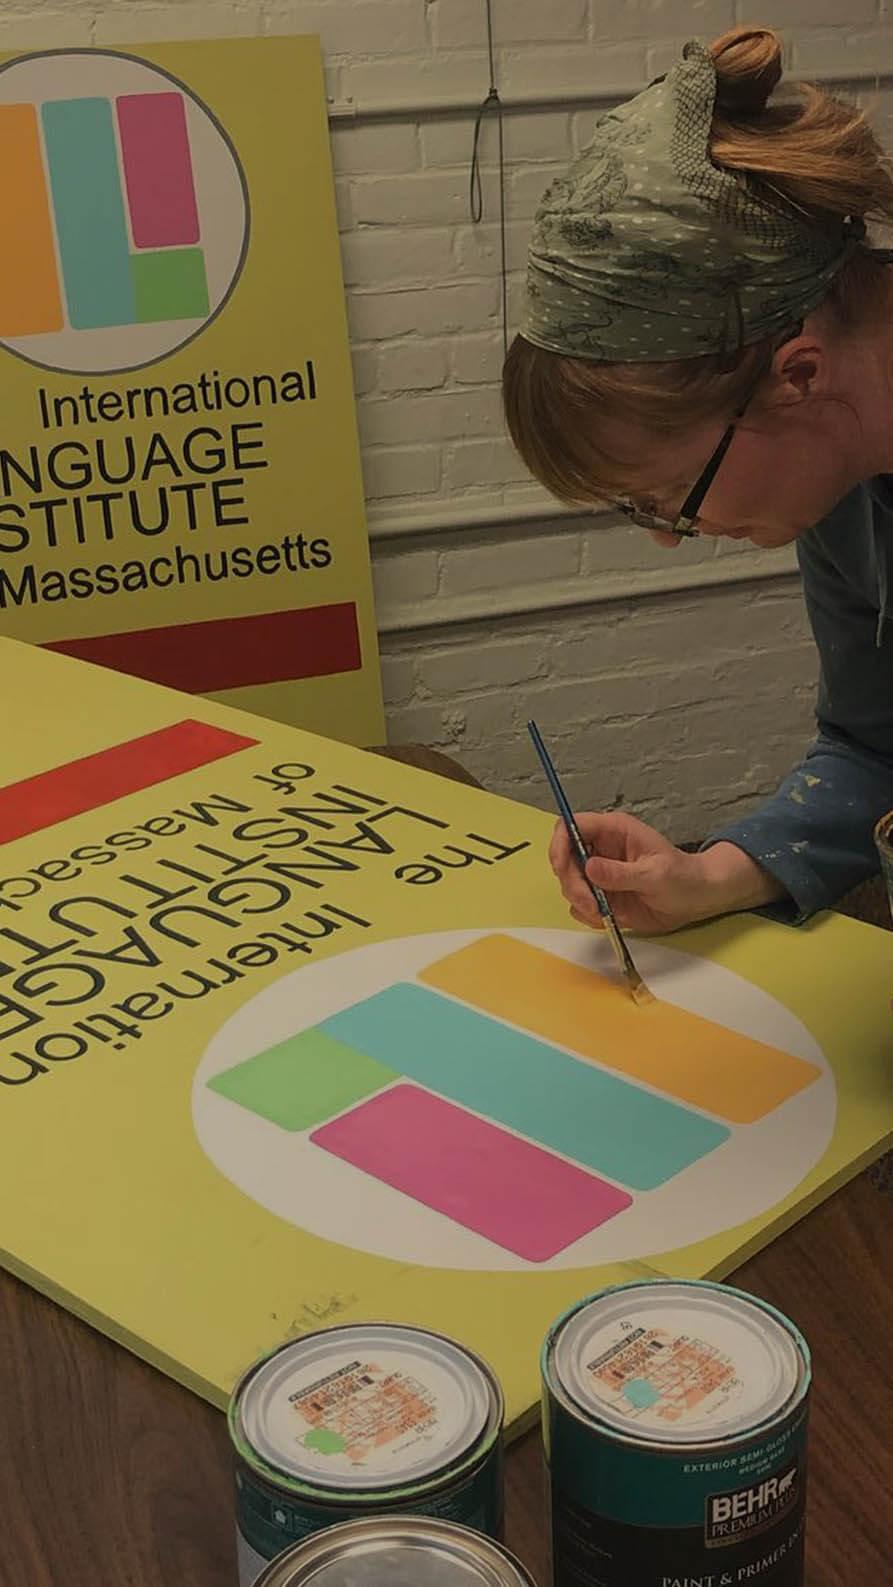 A member of the team is hand-painting a sign for the International Language Institute of Massachusetts. The sign looks like it would stand up on a sidewalk. The ILI logo is yellow, green, blue and red and the text is black on a pale yellow background.